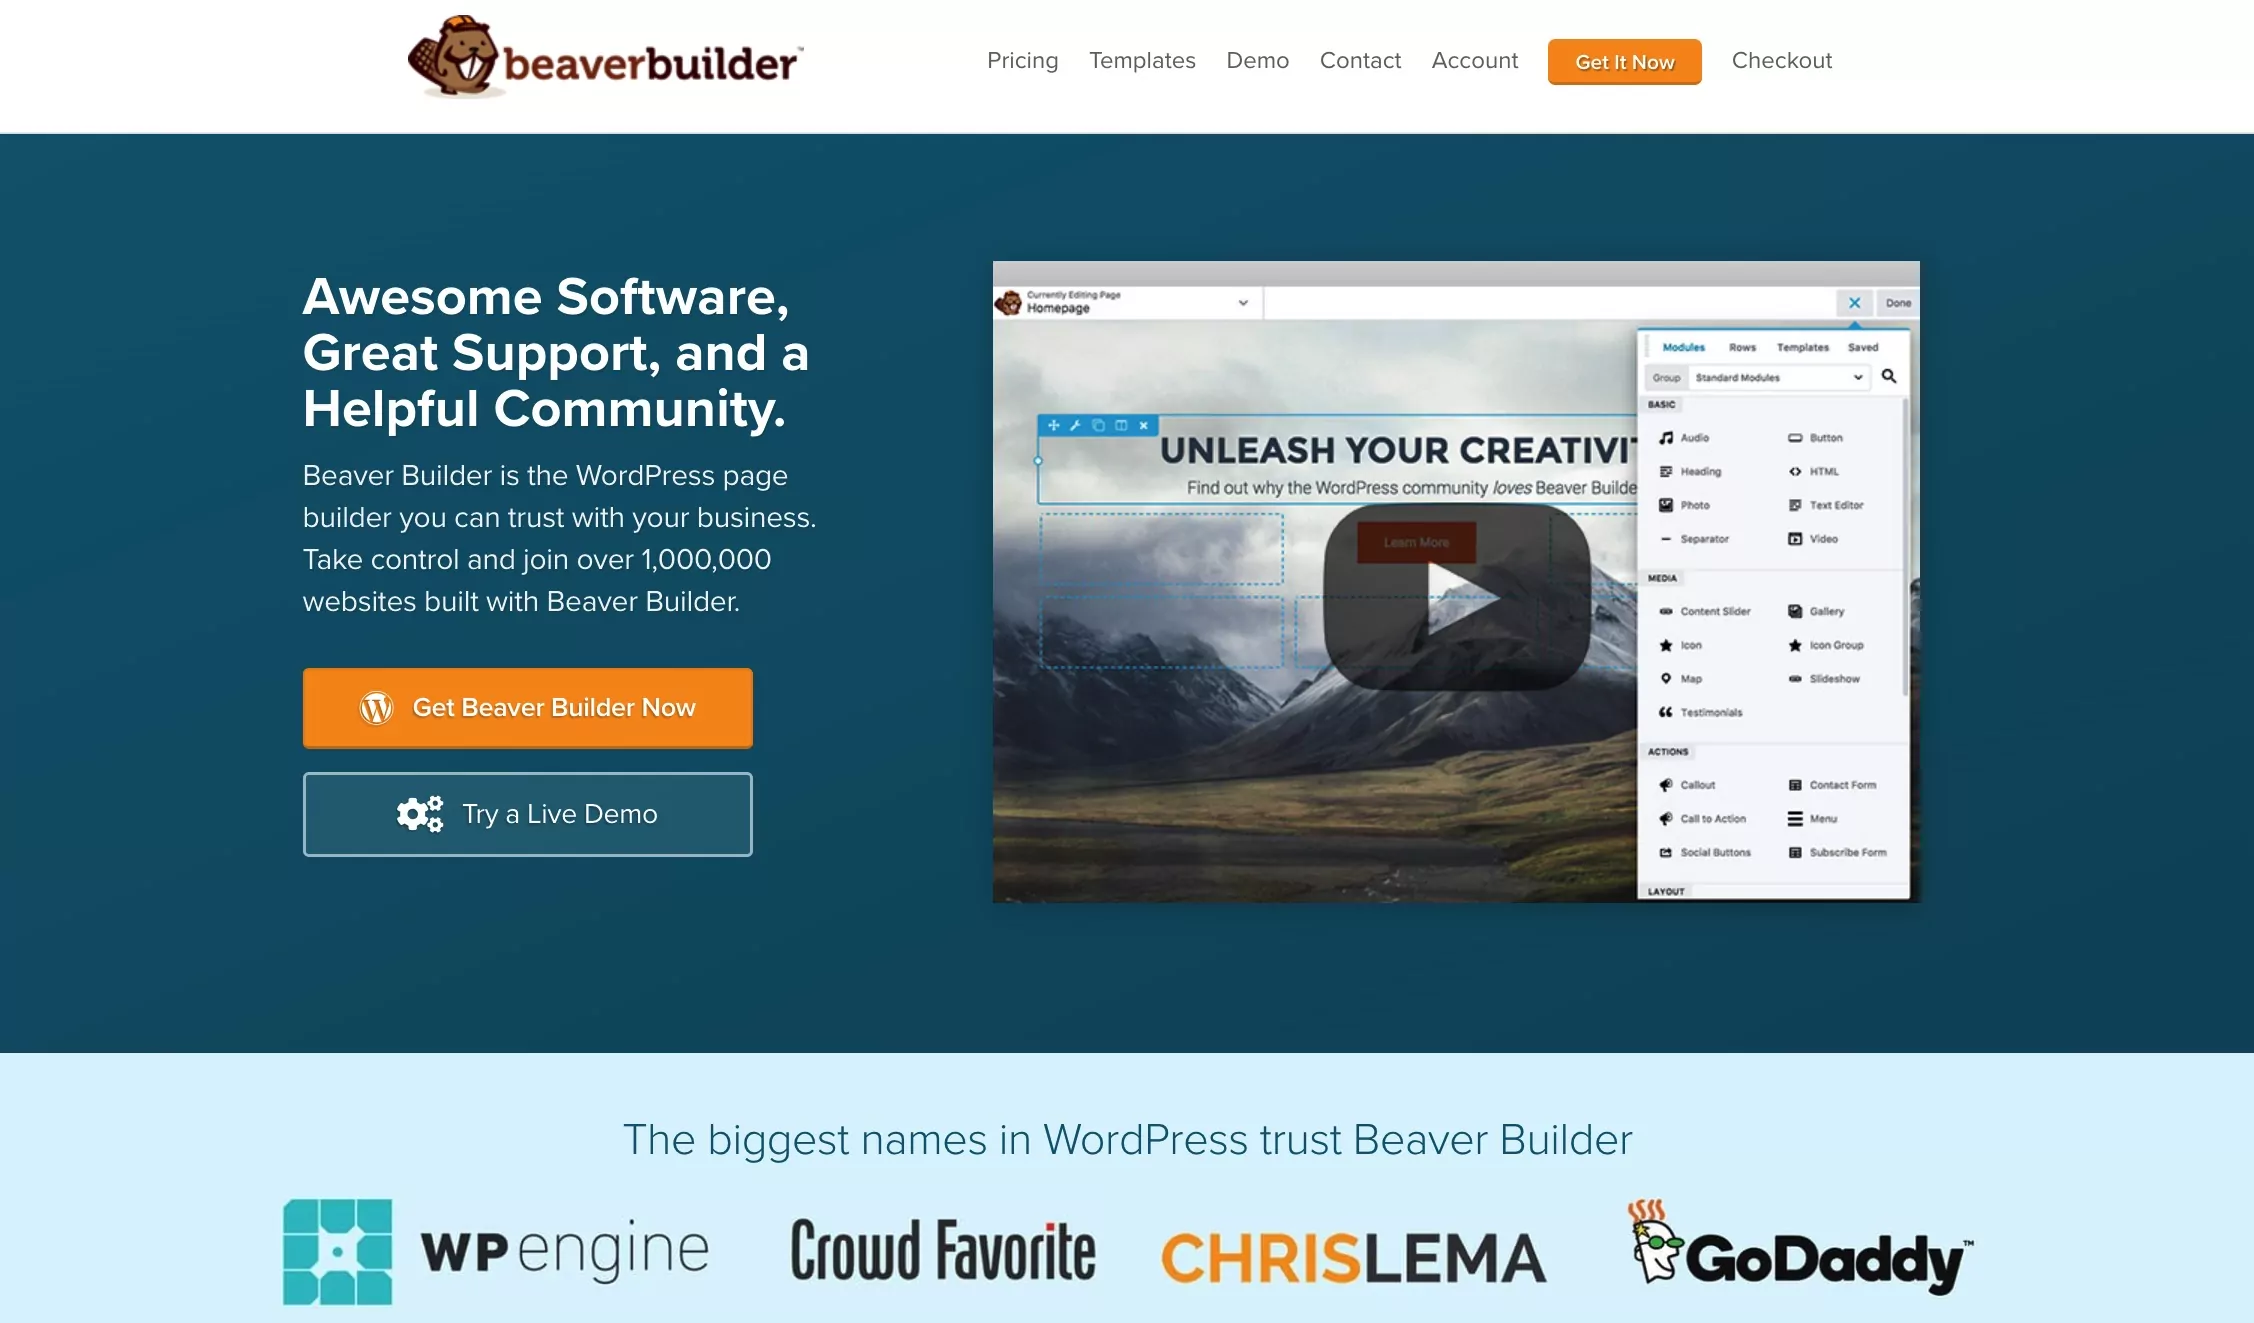 Beaver Builder - among the best WordPress page builders for multilingual sites